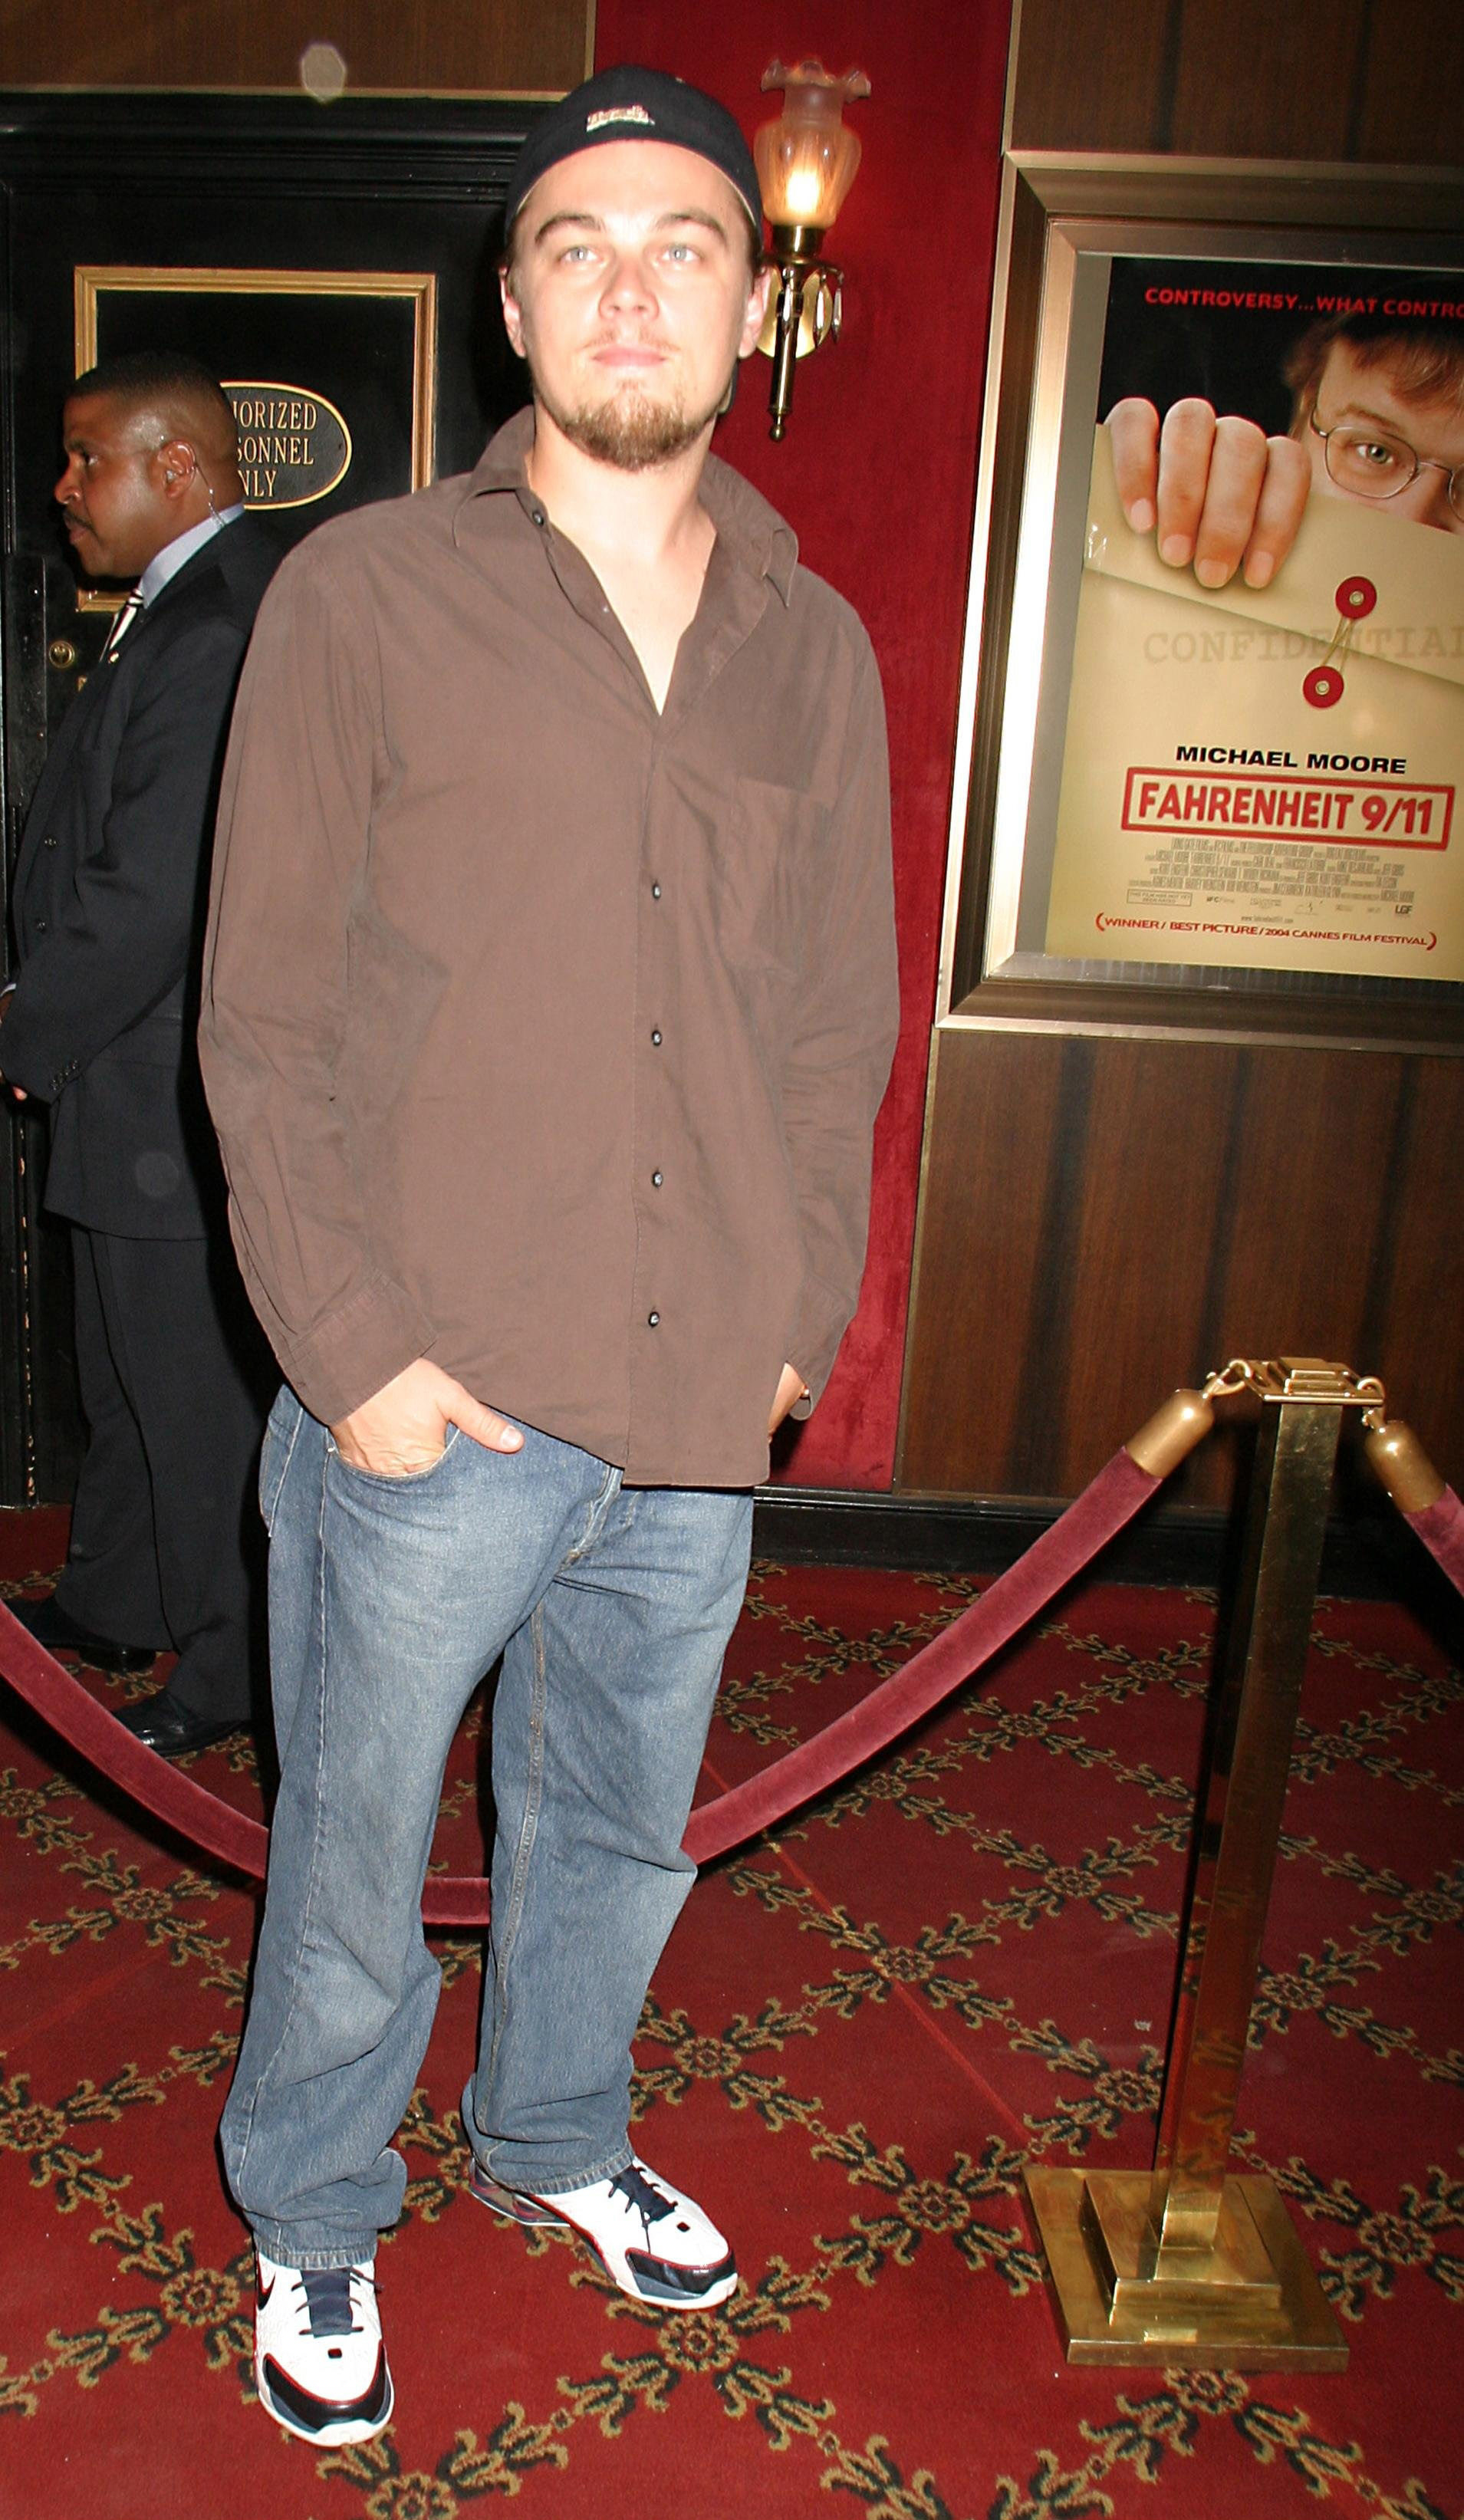 Leo is wearing a backwards baseball hat, an oversized brown button-down that is untucked, a pair of baggy light wash jeans, and Nike sneakers.